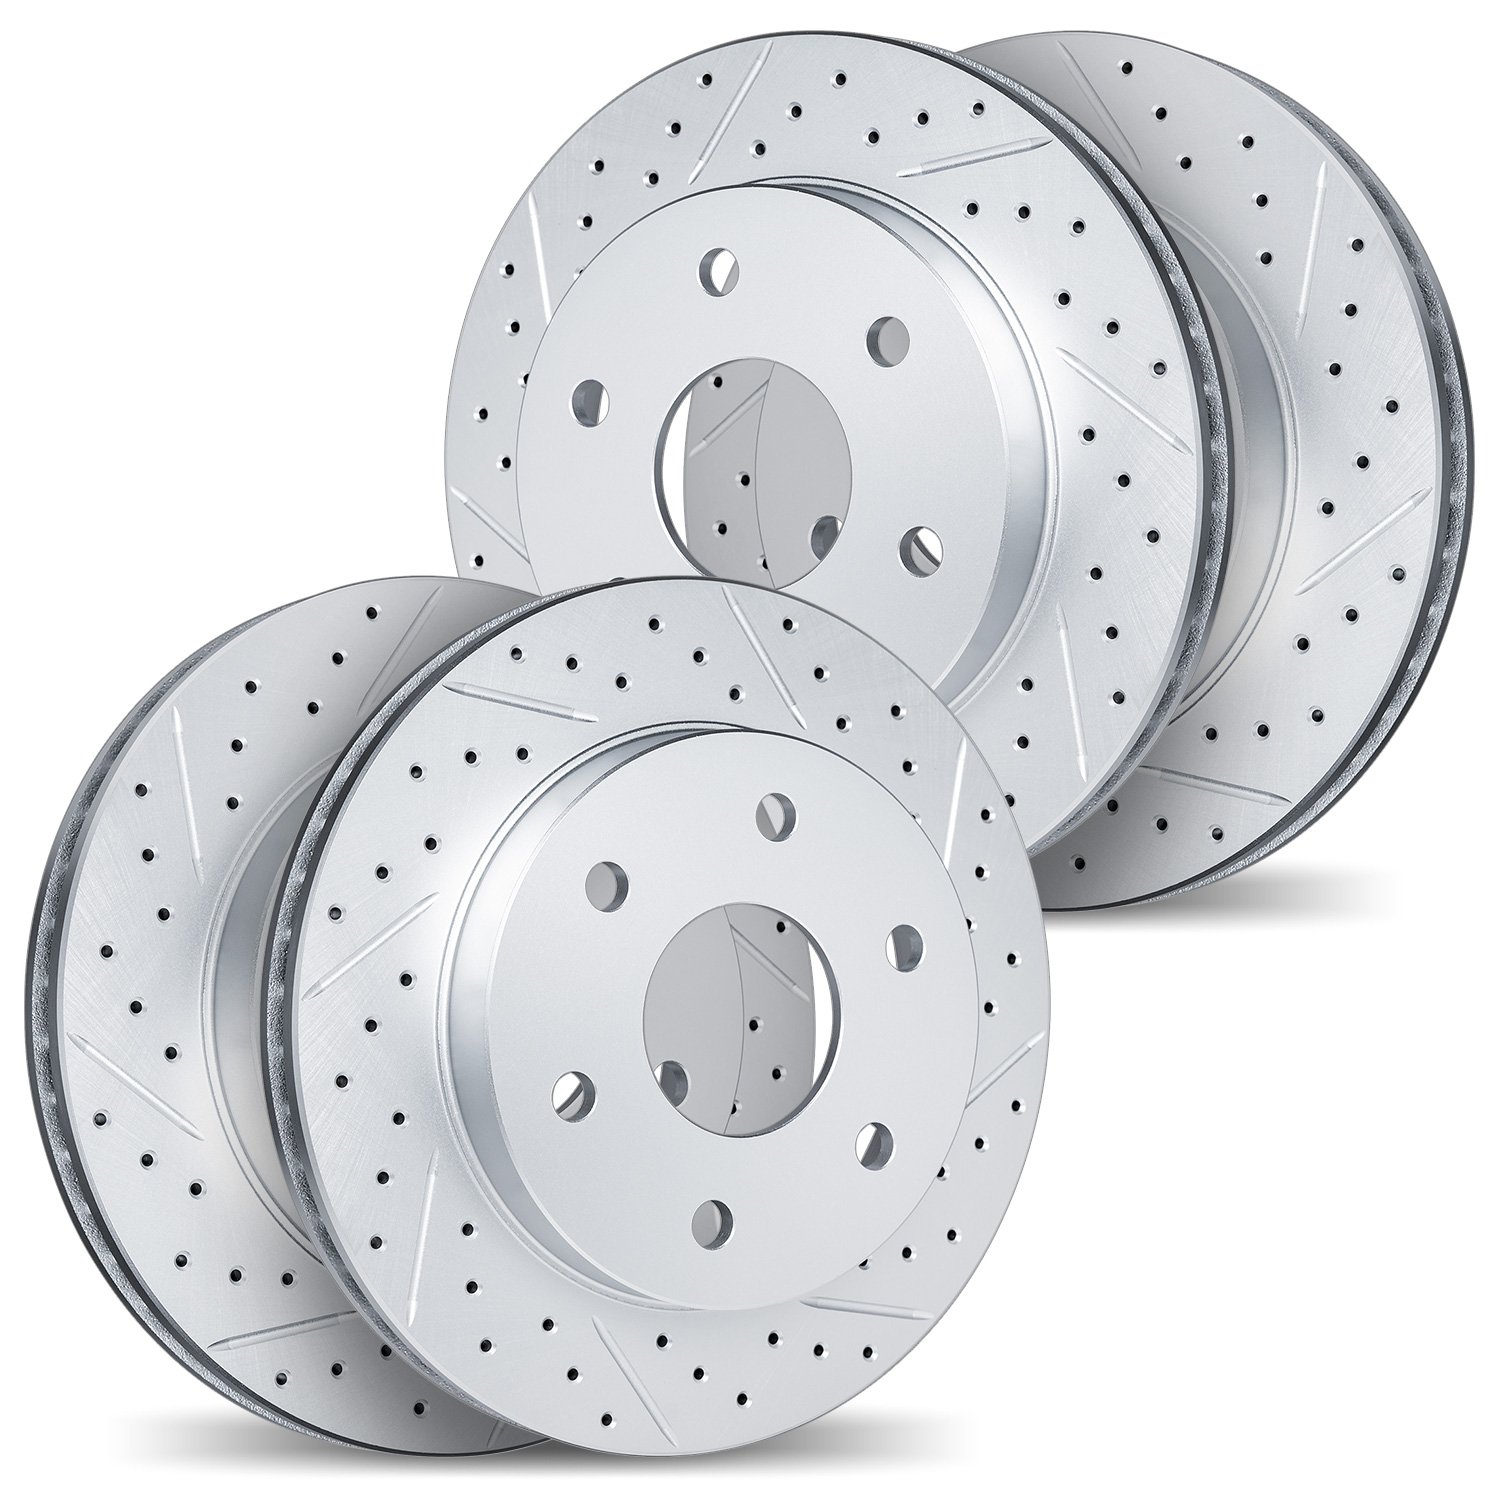 2004-67038 Geoperformance Drilled/Slotted Brake Rotors, Fits Select Multiple Makes/Models, Position: Front and Rear